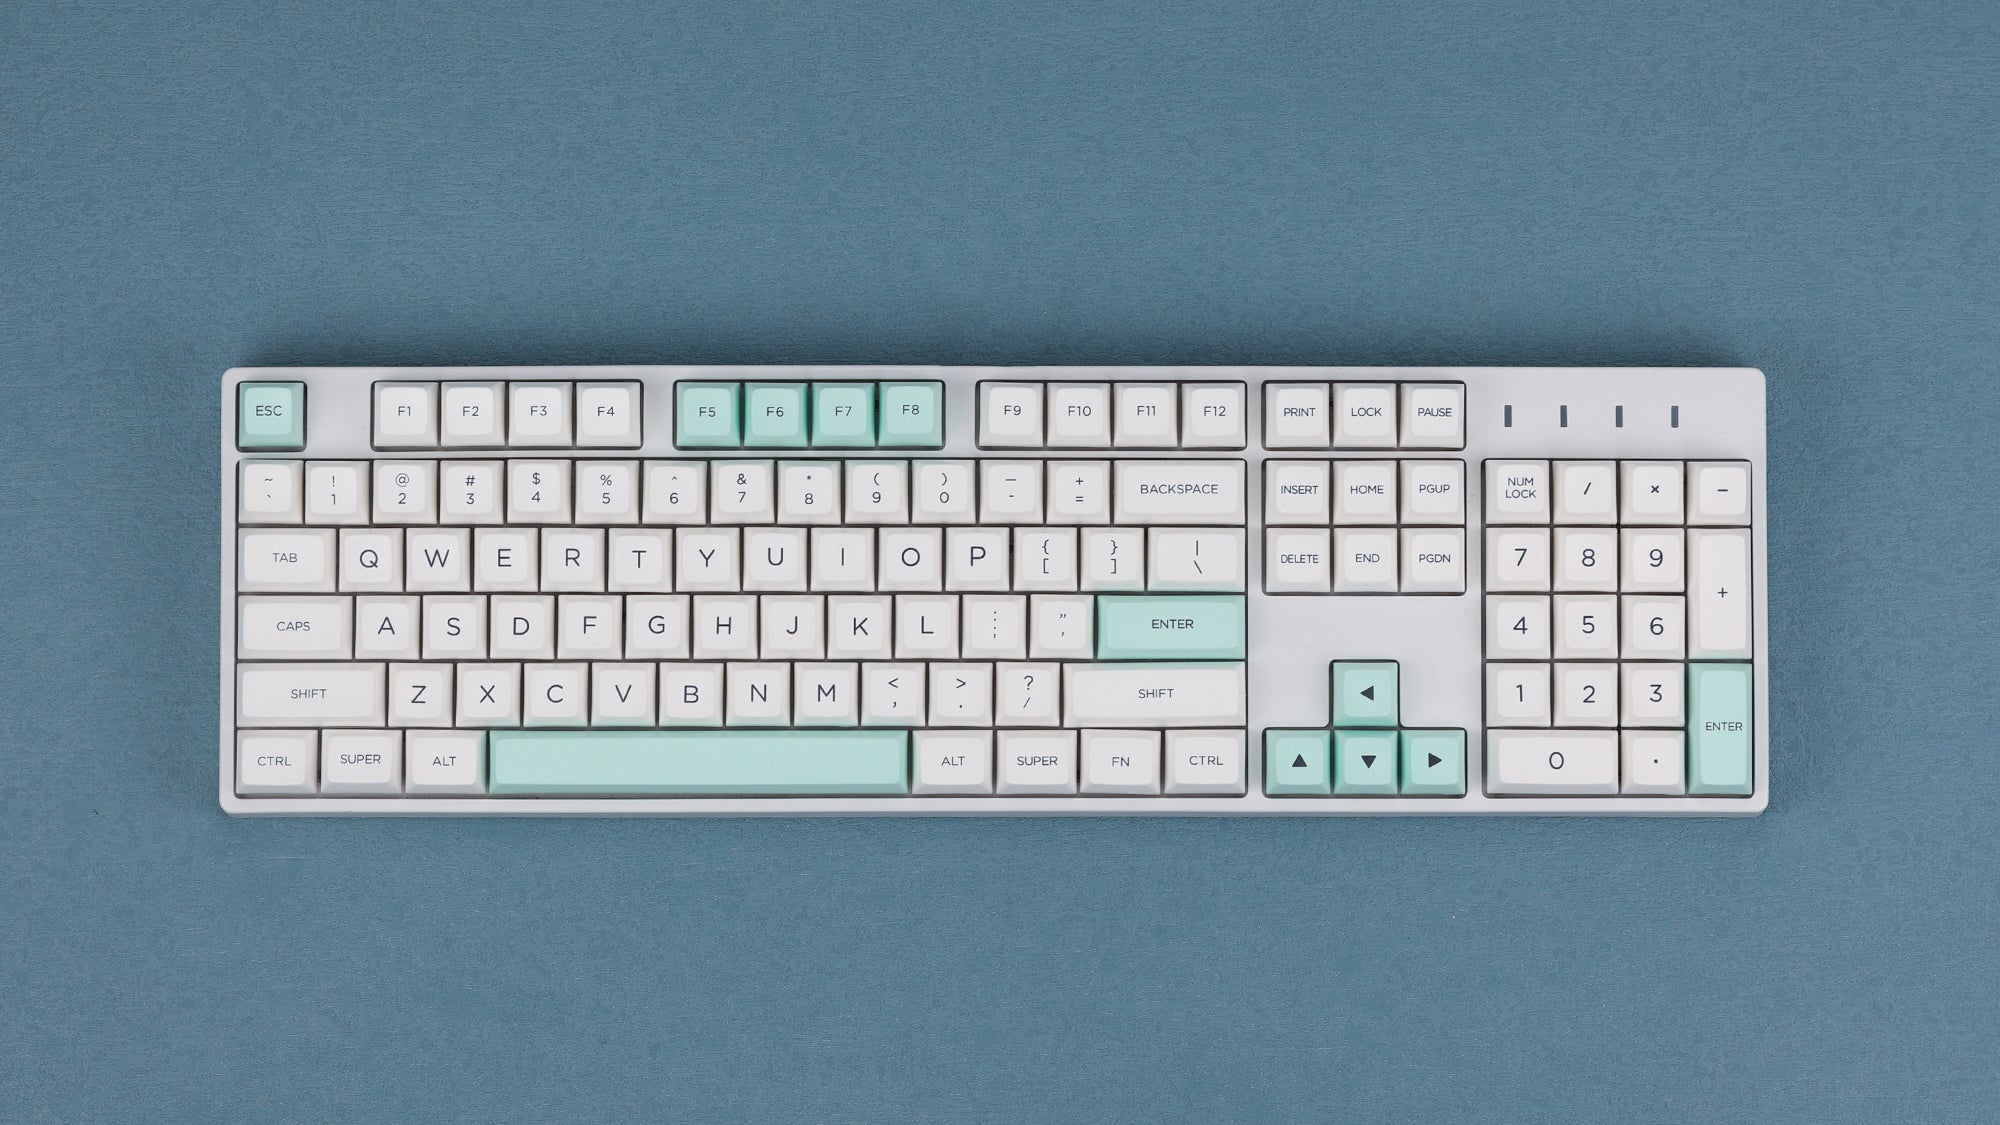 OSA Simple White PBT Dye-Sub Keycaps Set PBT M aterial 152 keys Compatible With Cherry MX switches and MX-style clones